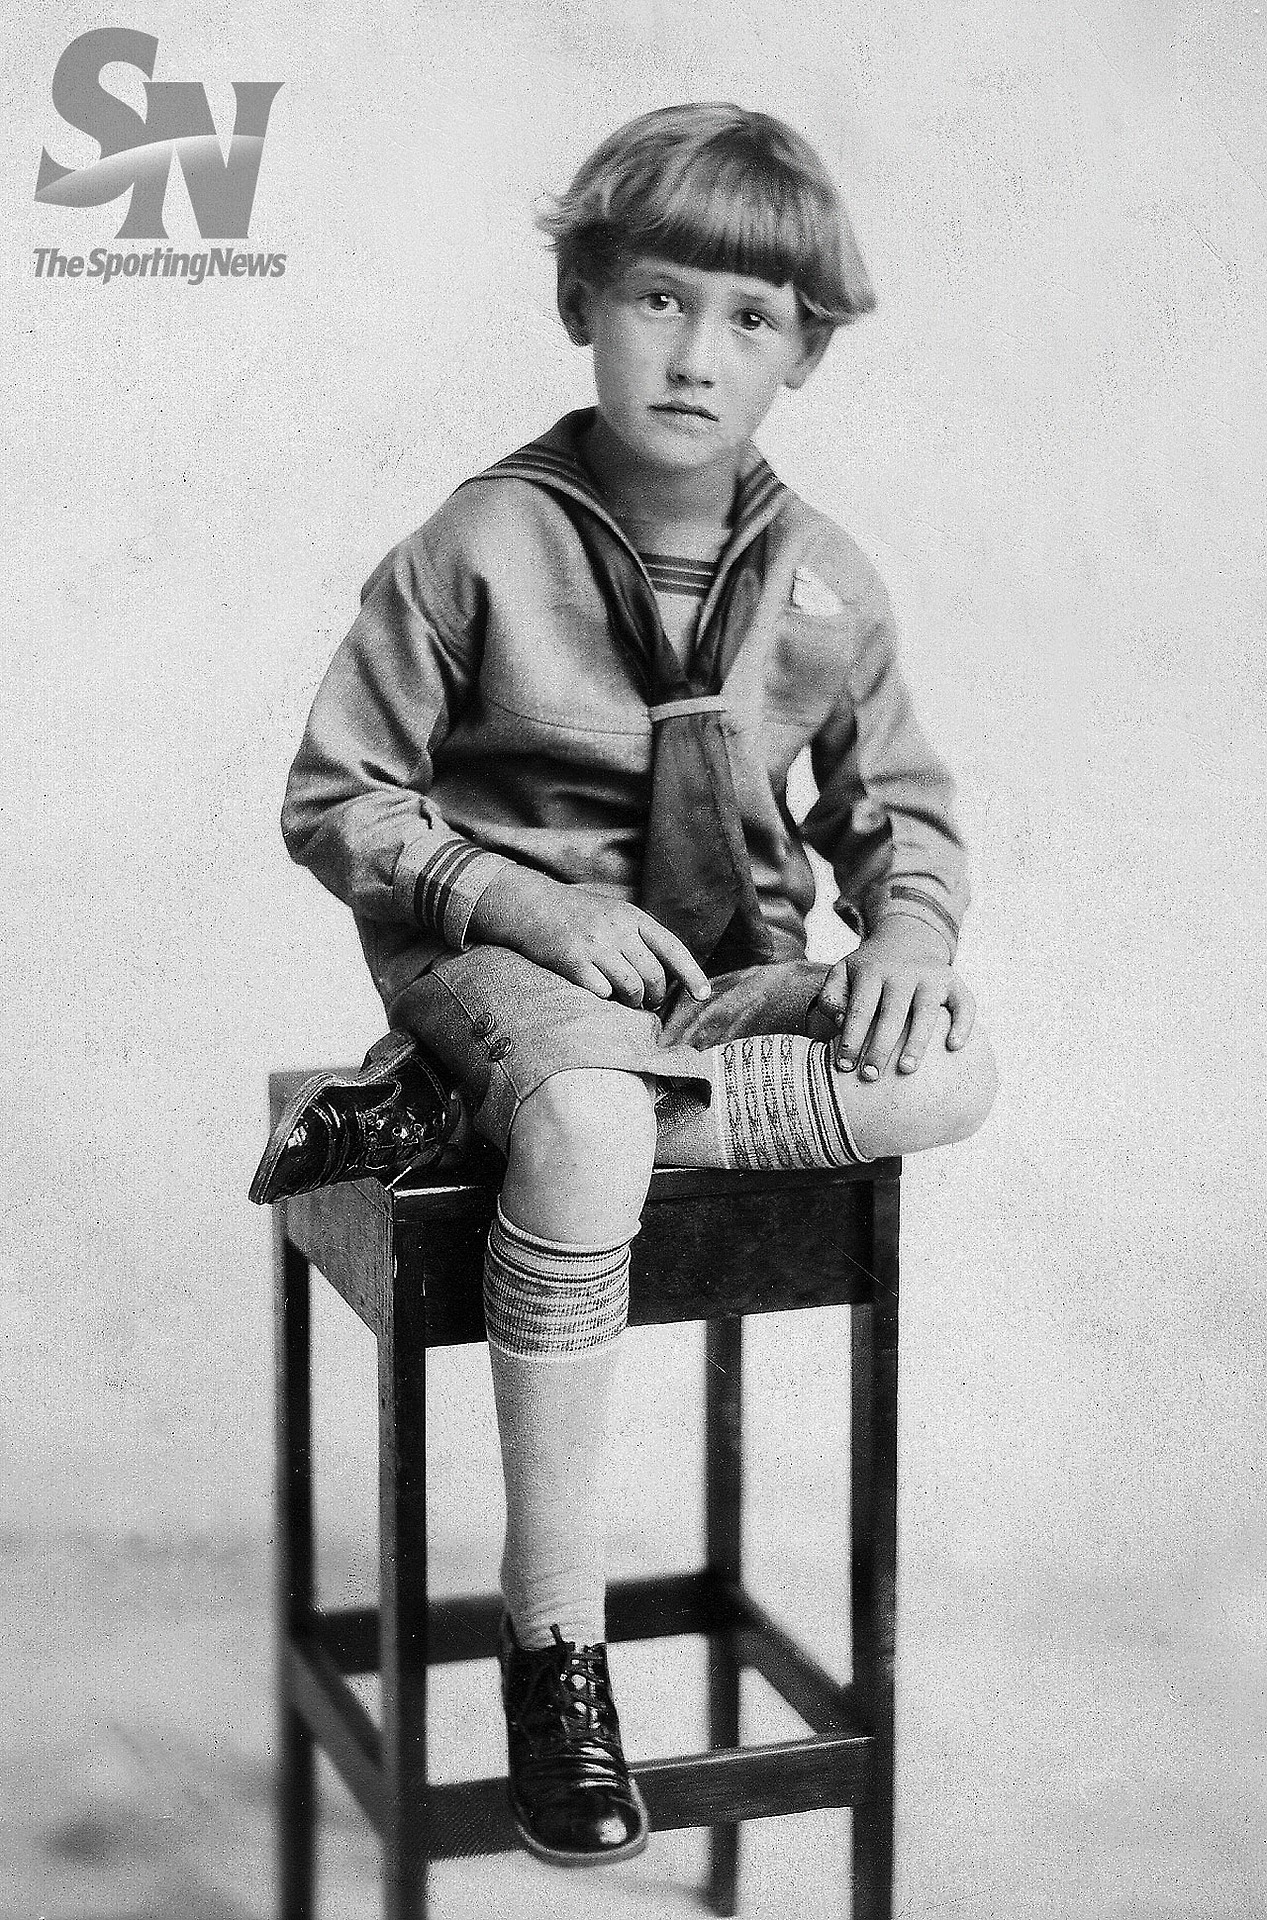 WILLIAMS AT AGE 6